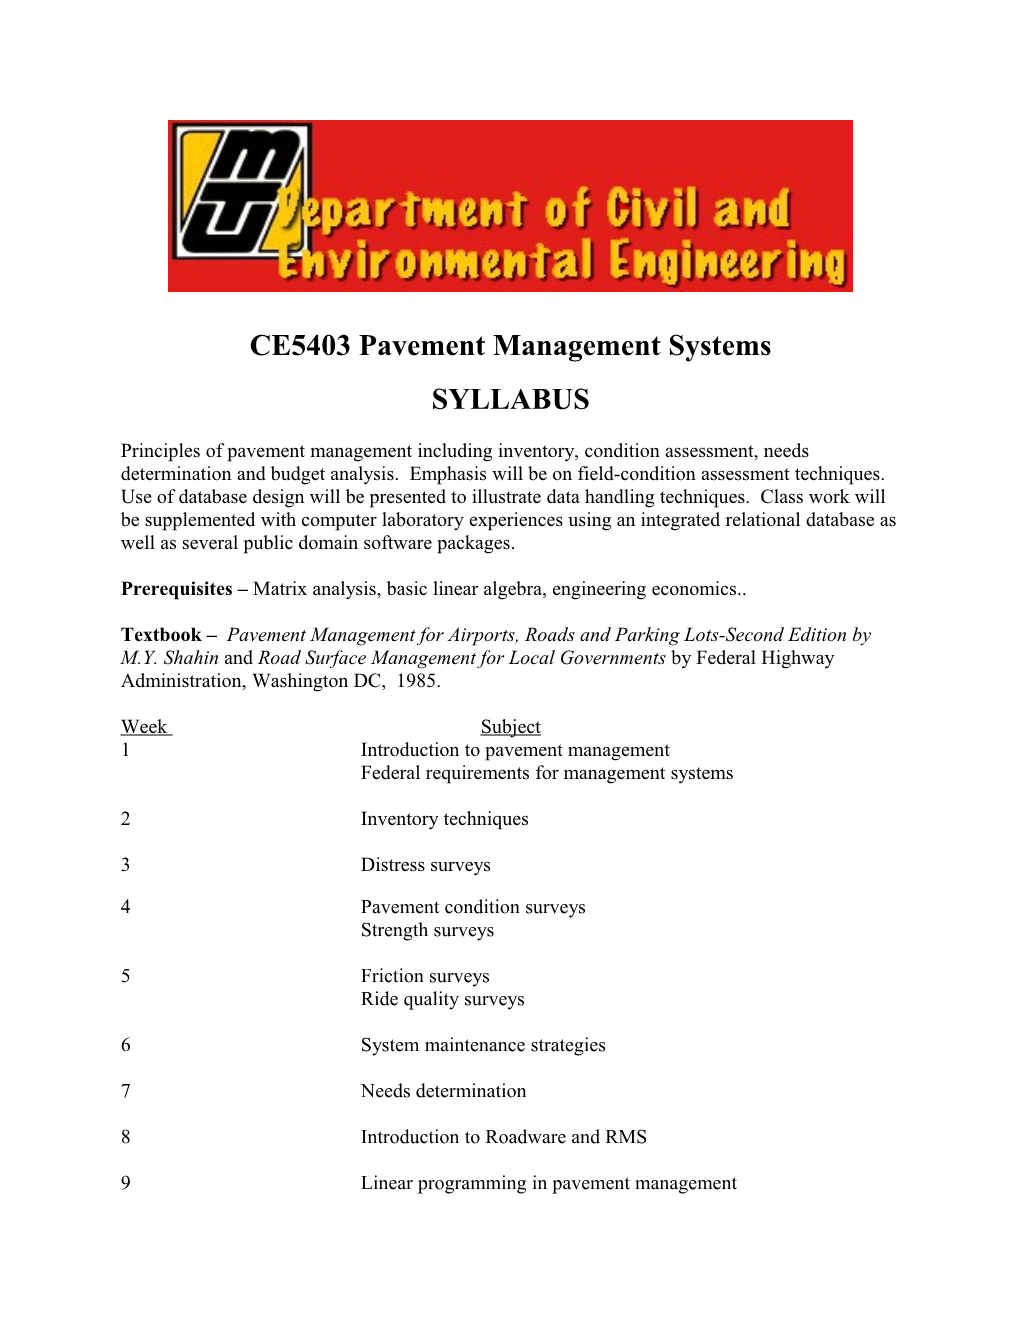 Department of Civil and Environmental Engineering - CE 445 Pavement Management